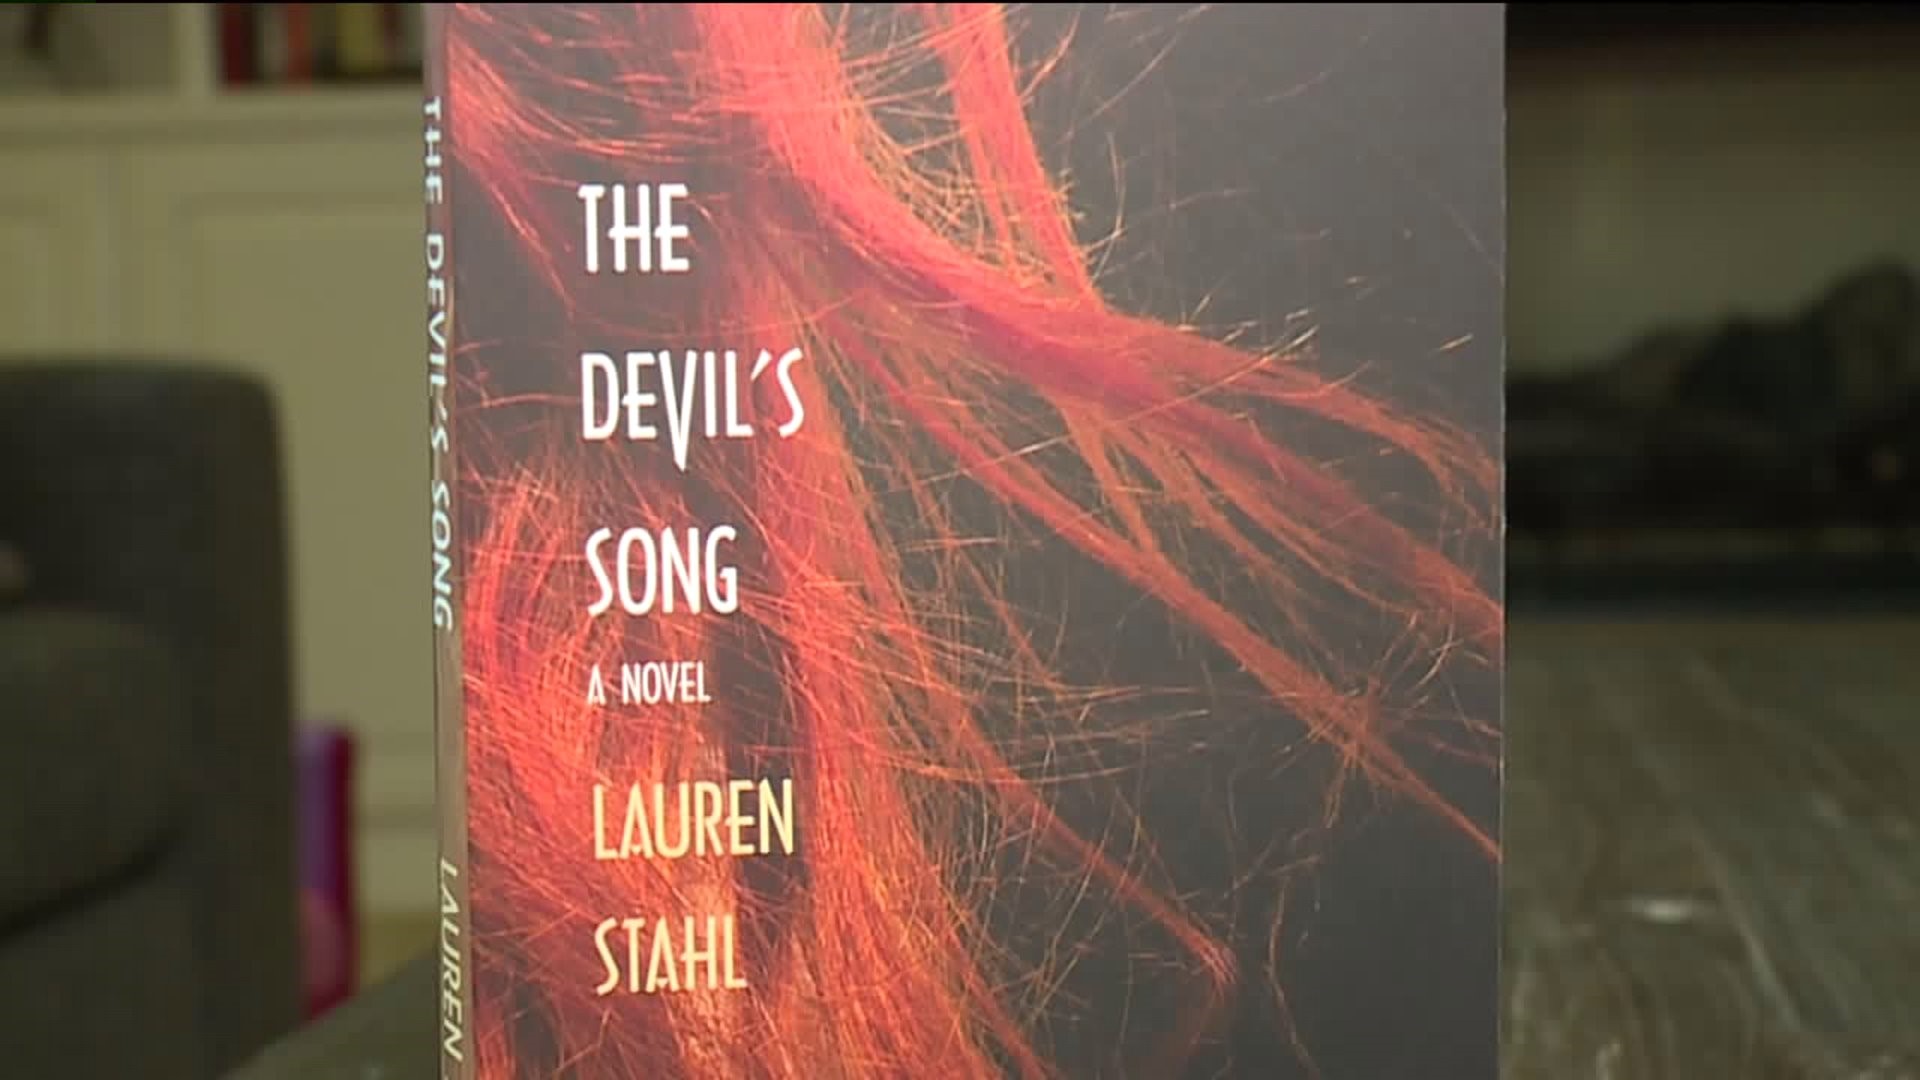 'The Devil's Song' - Local Author Draws on Life Experience for New Novel